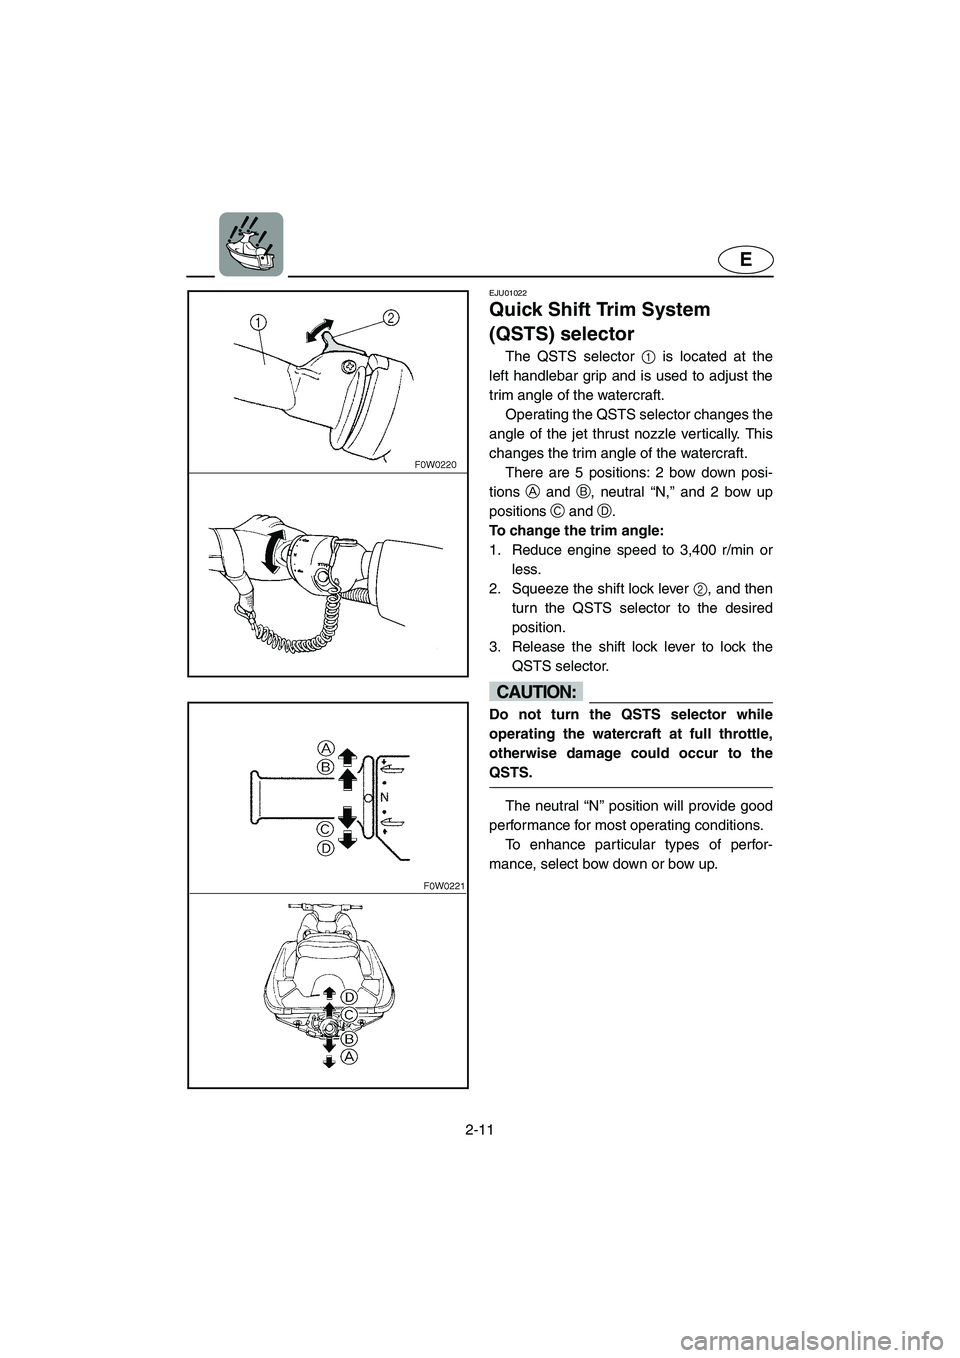 YAMAHA GP800R 2002 Owners Guide 2-11
E
EJU01022 
Quick Shift Trim System 
(QSTS) selector  
The QSTS selector 1 is located at the
left handlebar grip and is used to adjust the
trim angle of the watercraft. 
Operating the QSTS select